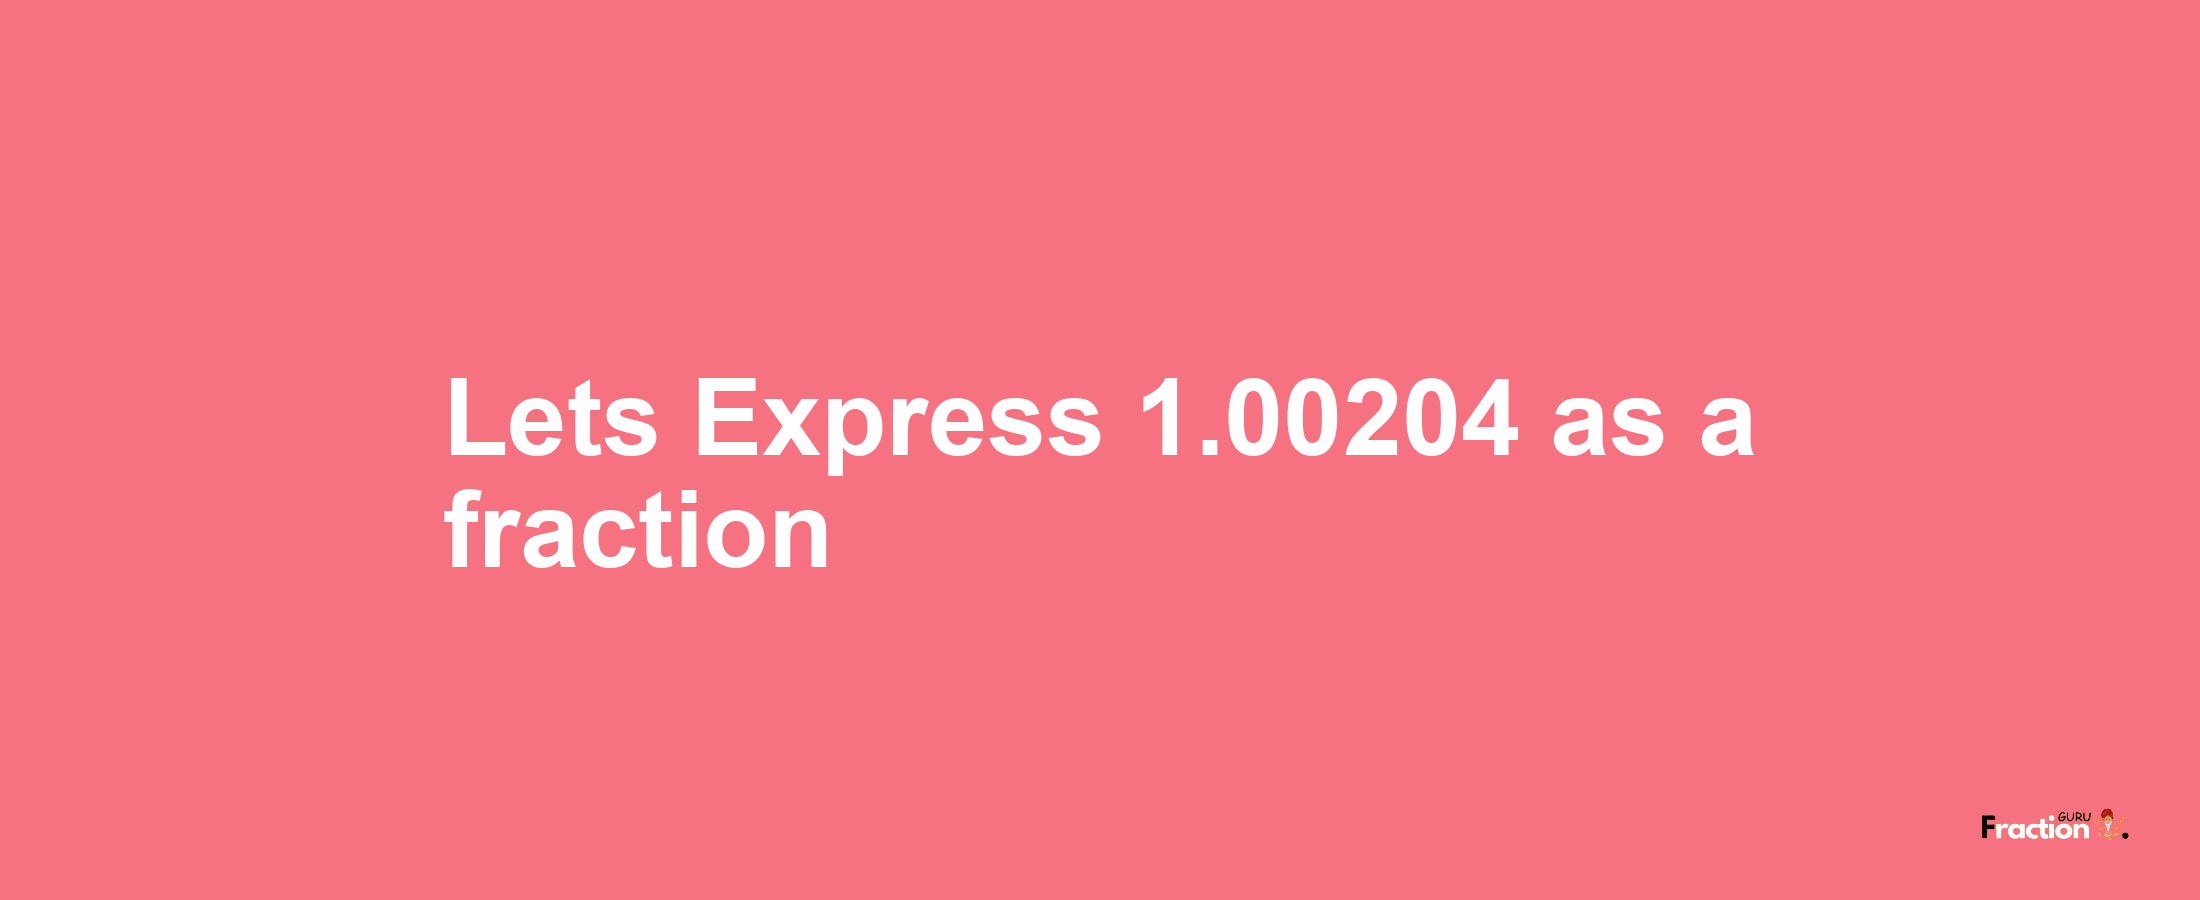 Lets Express 1.00204 as afraction